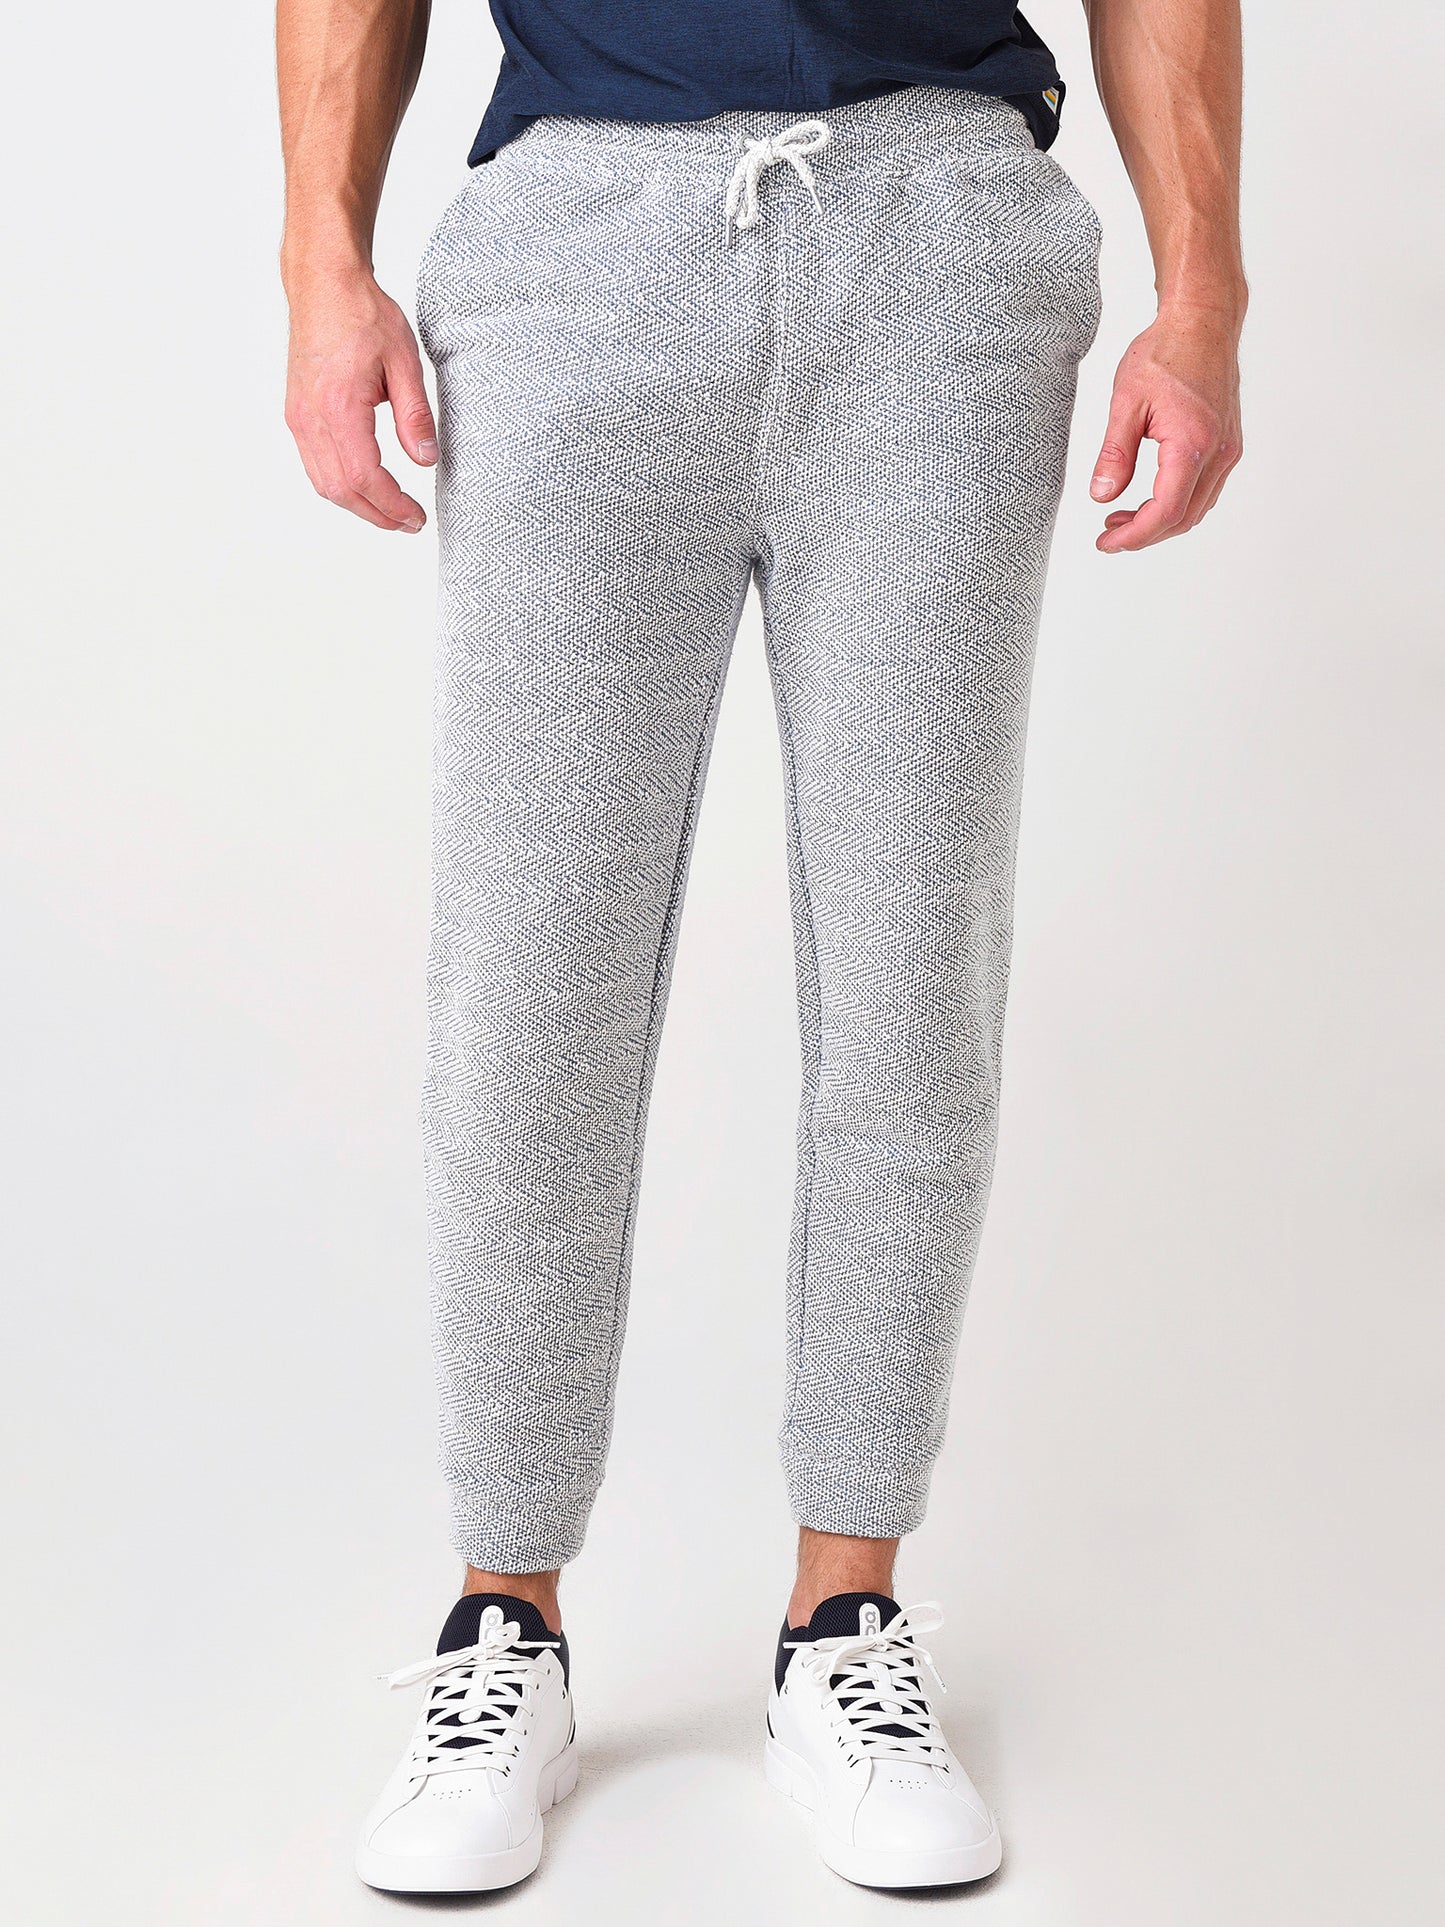 Faherty Brand Men's Whitewater Sweatpant